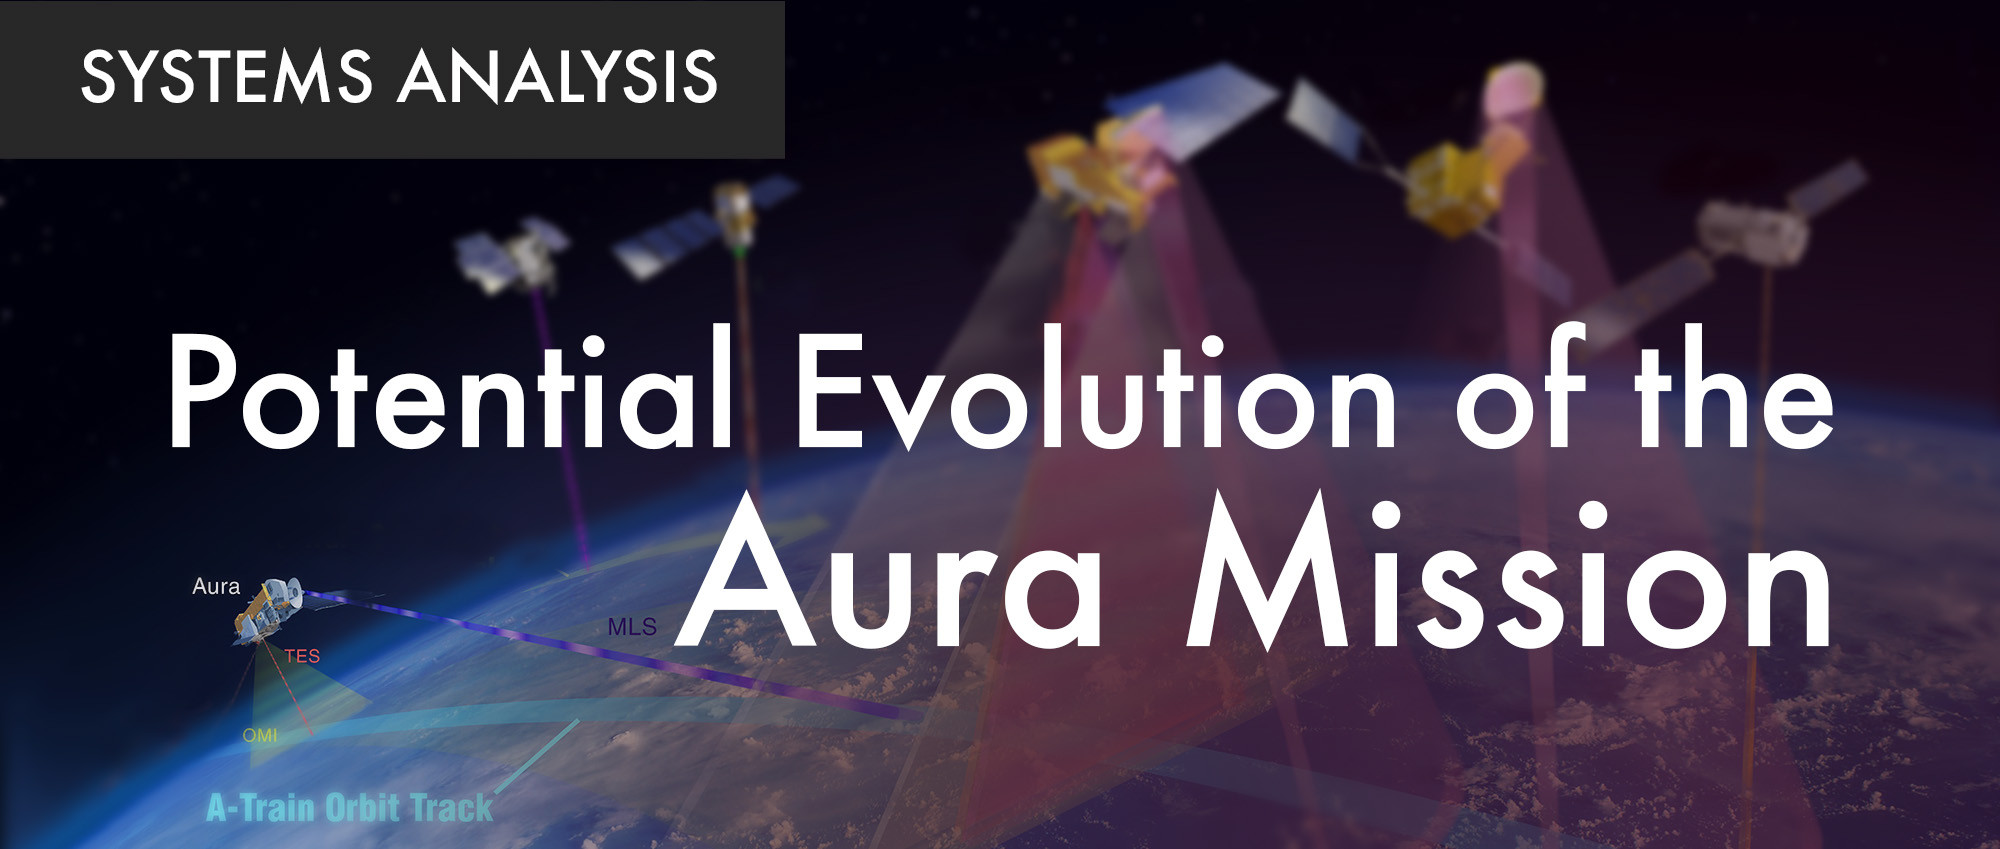 Systems Analysis of the Potential Evolution of the Aura Mission